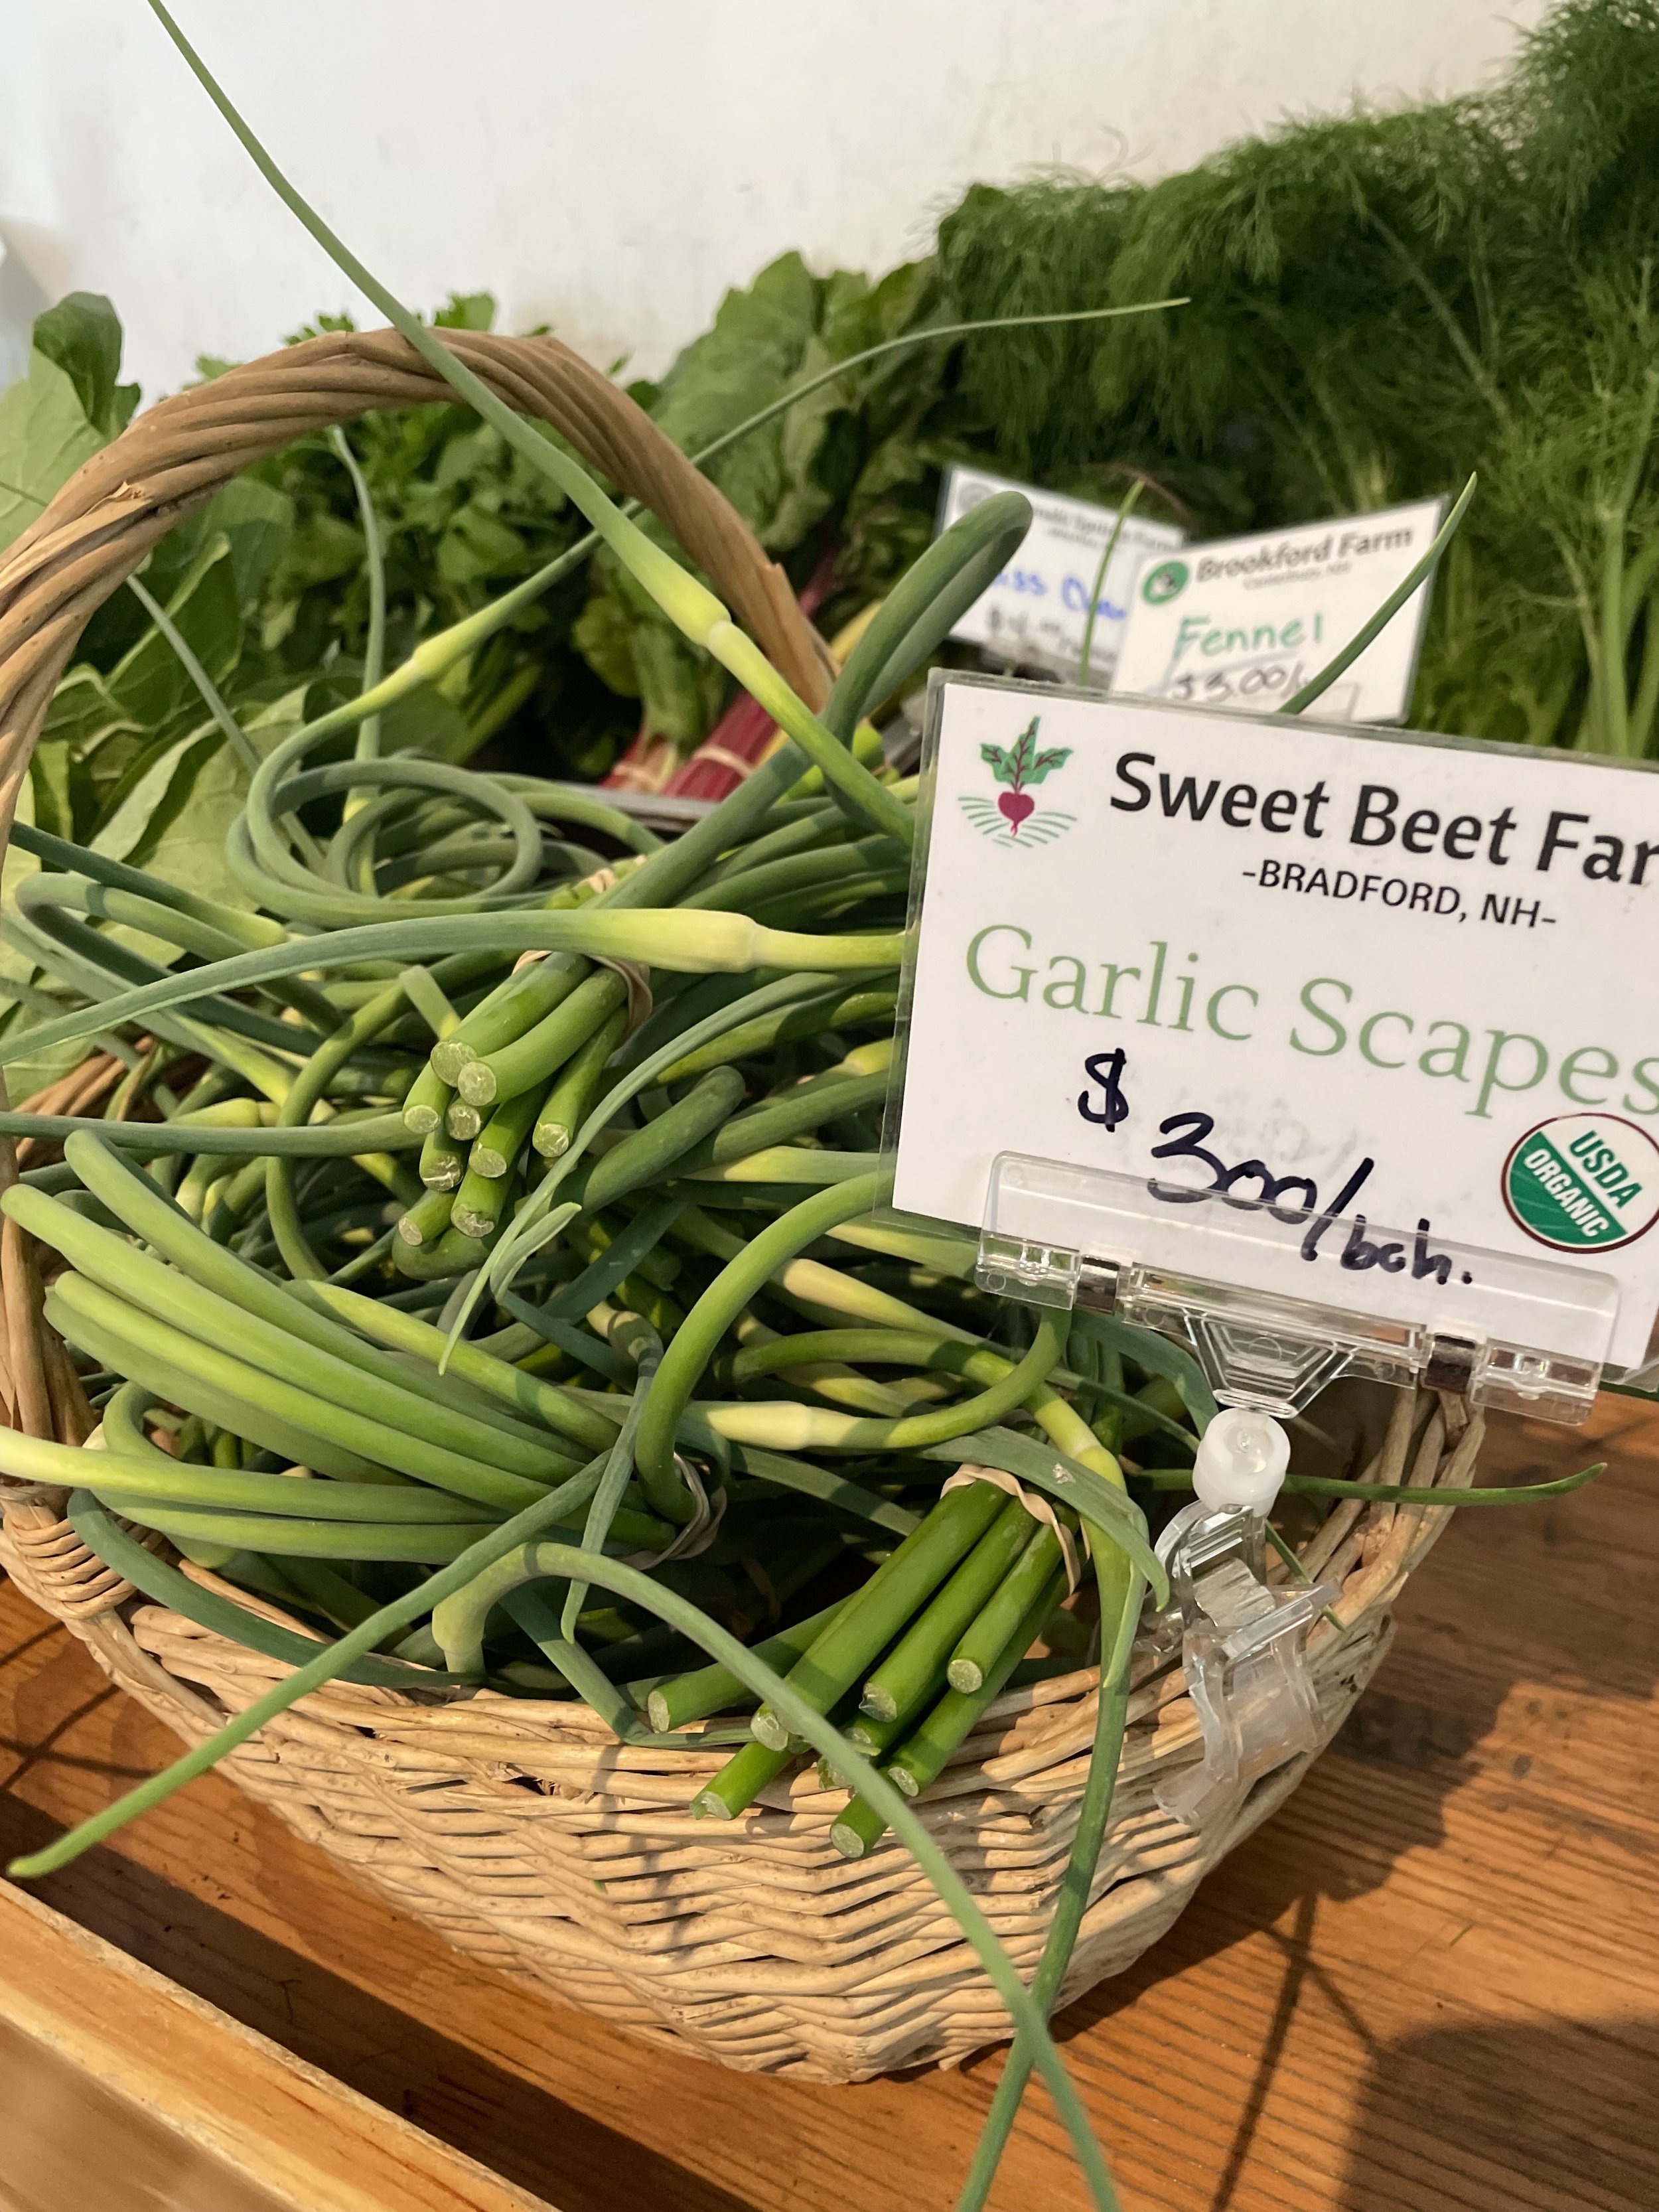 All the seasonal favorites - like garlic scapes!